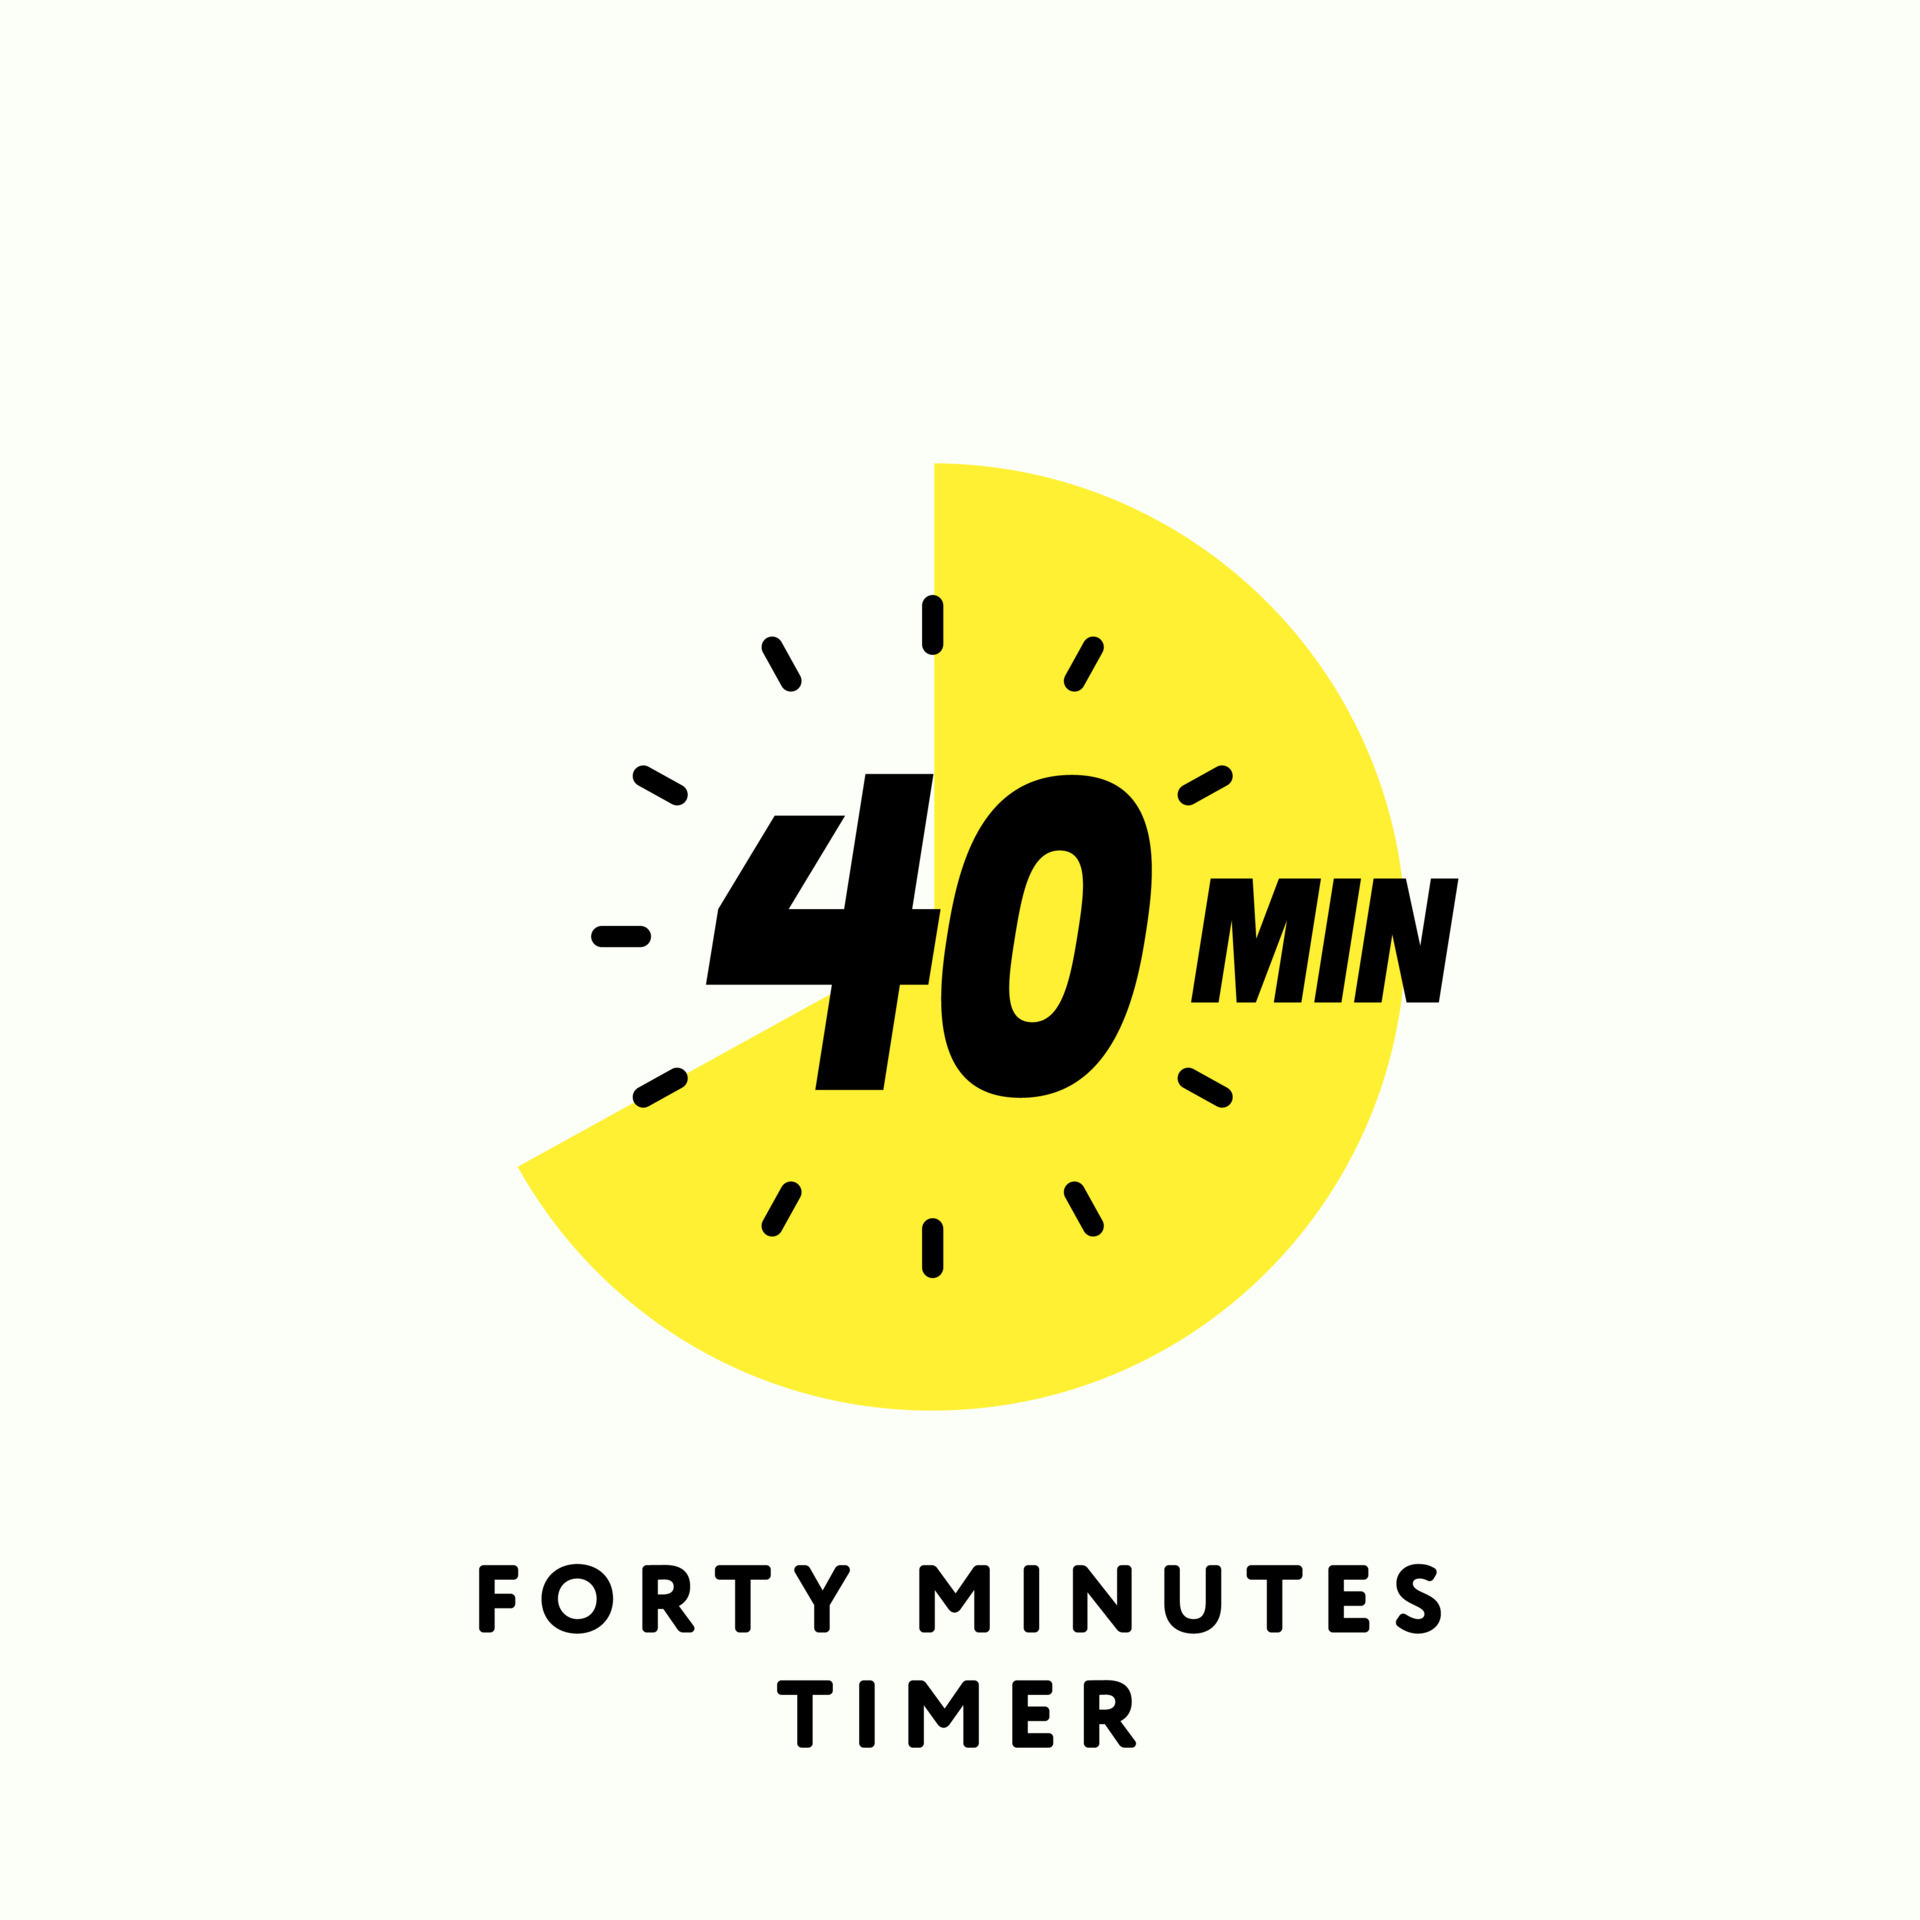 40 Minutes timer. 40 minute times